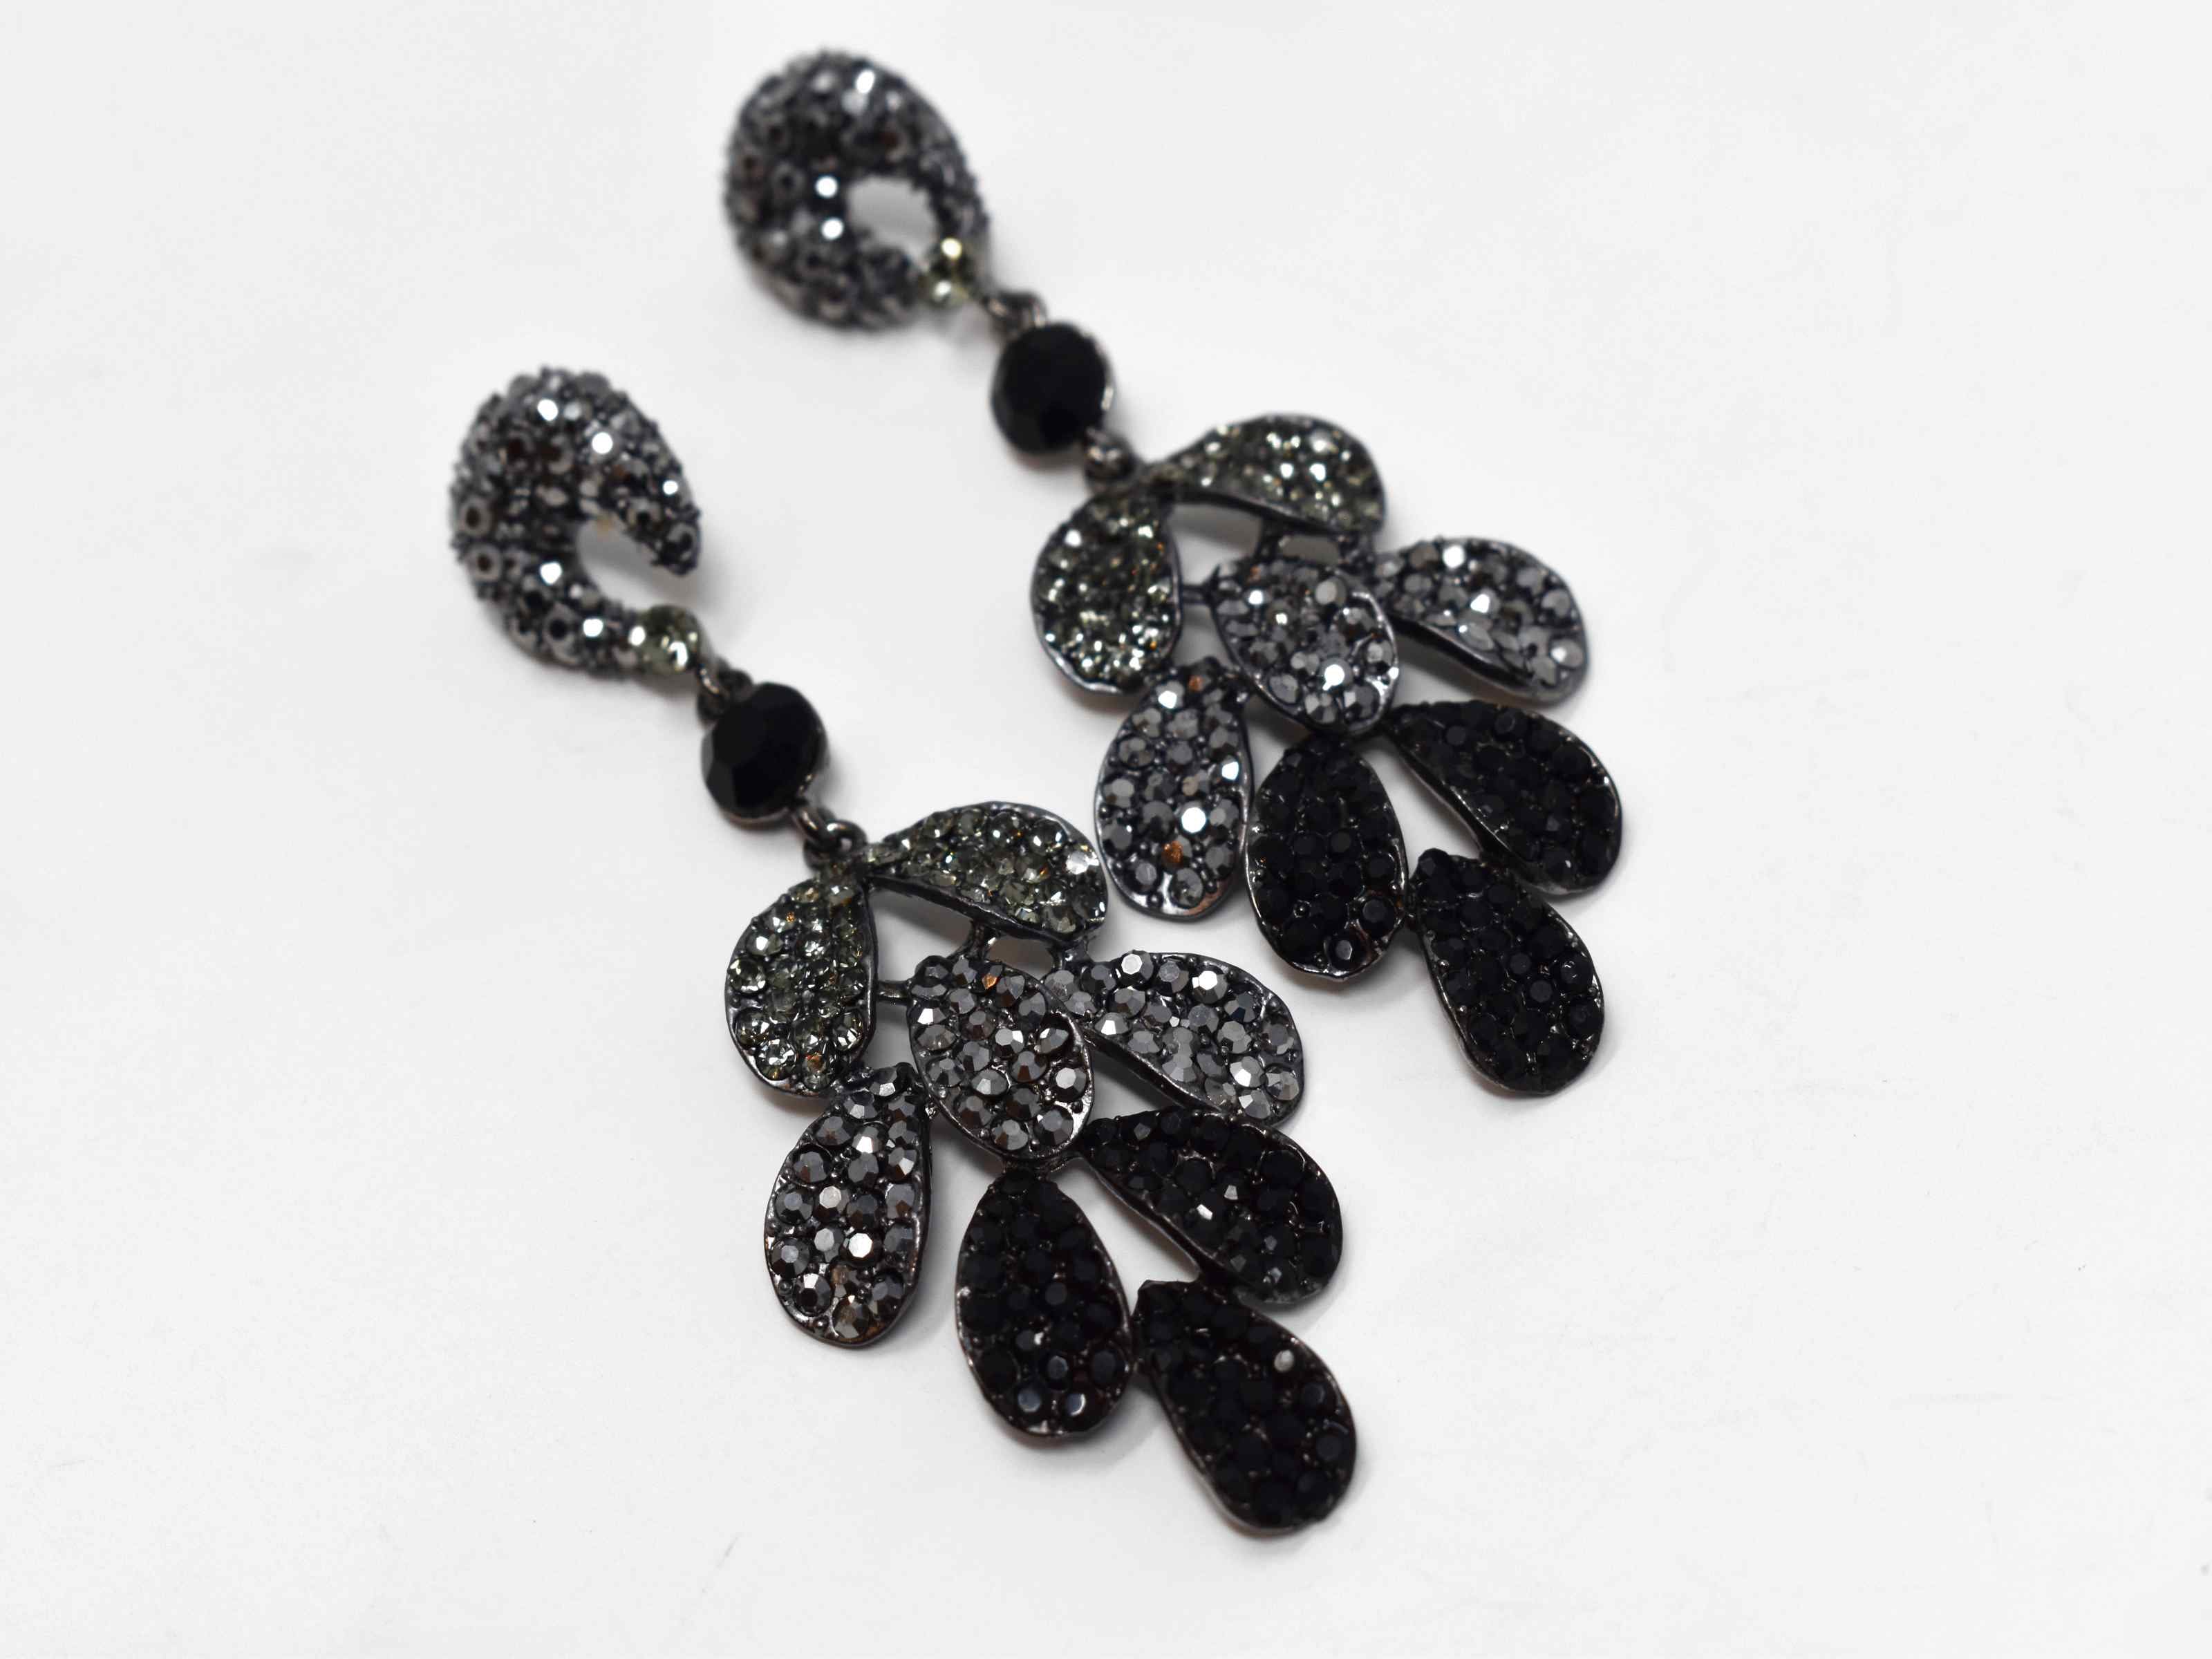 Our Erica Pewter dark silver earrings is designed to stand out from the crowd. These statement drop earrings are three tiered design accented with grey pewter and black stones. It is 3 1/2 inches in length with a push back clasp.